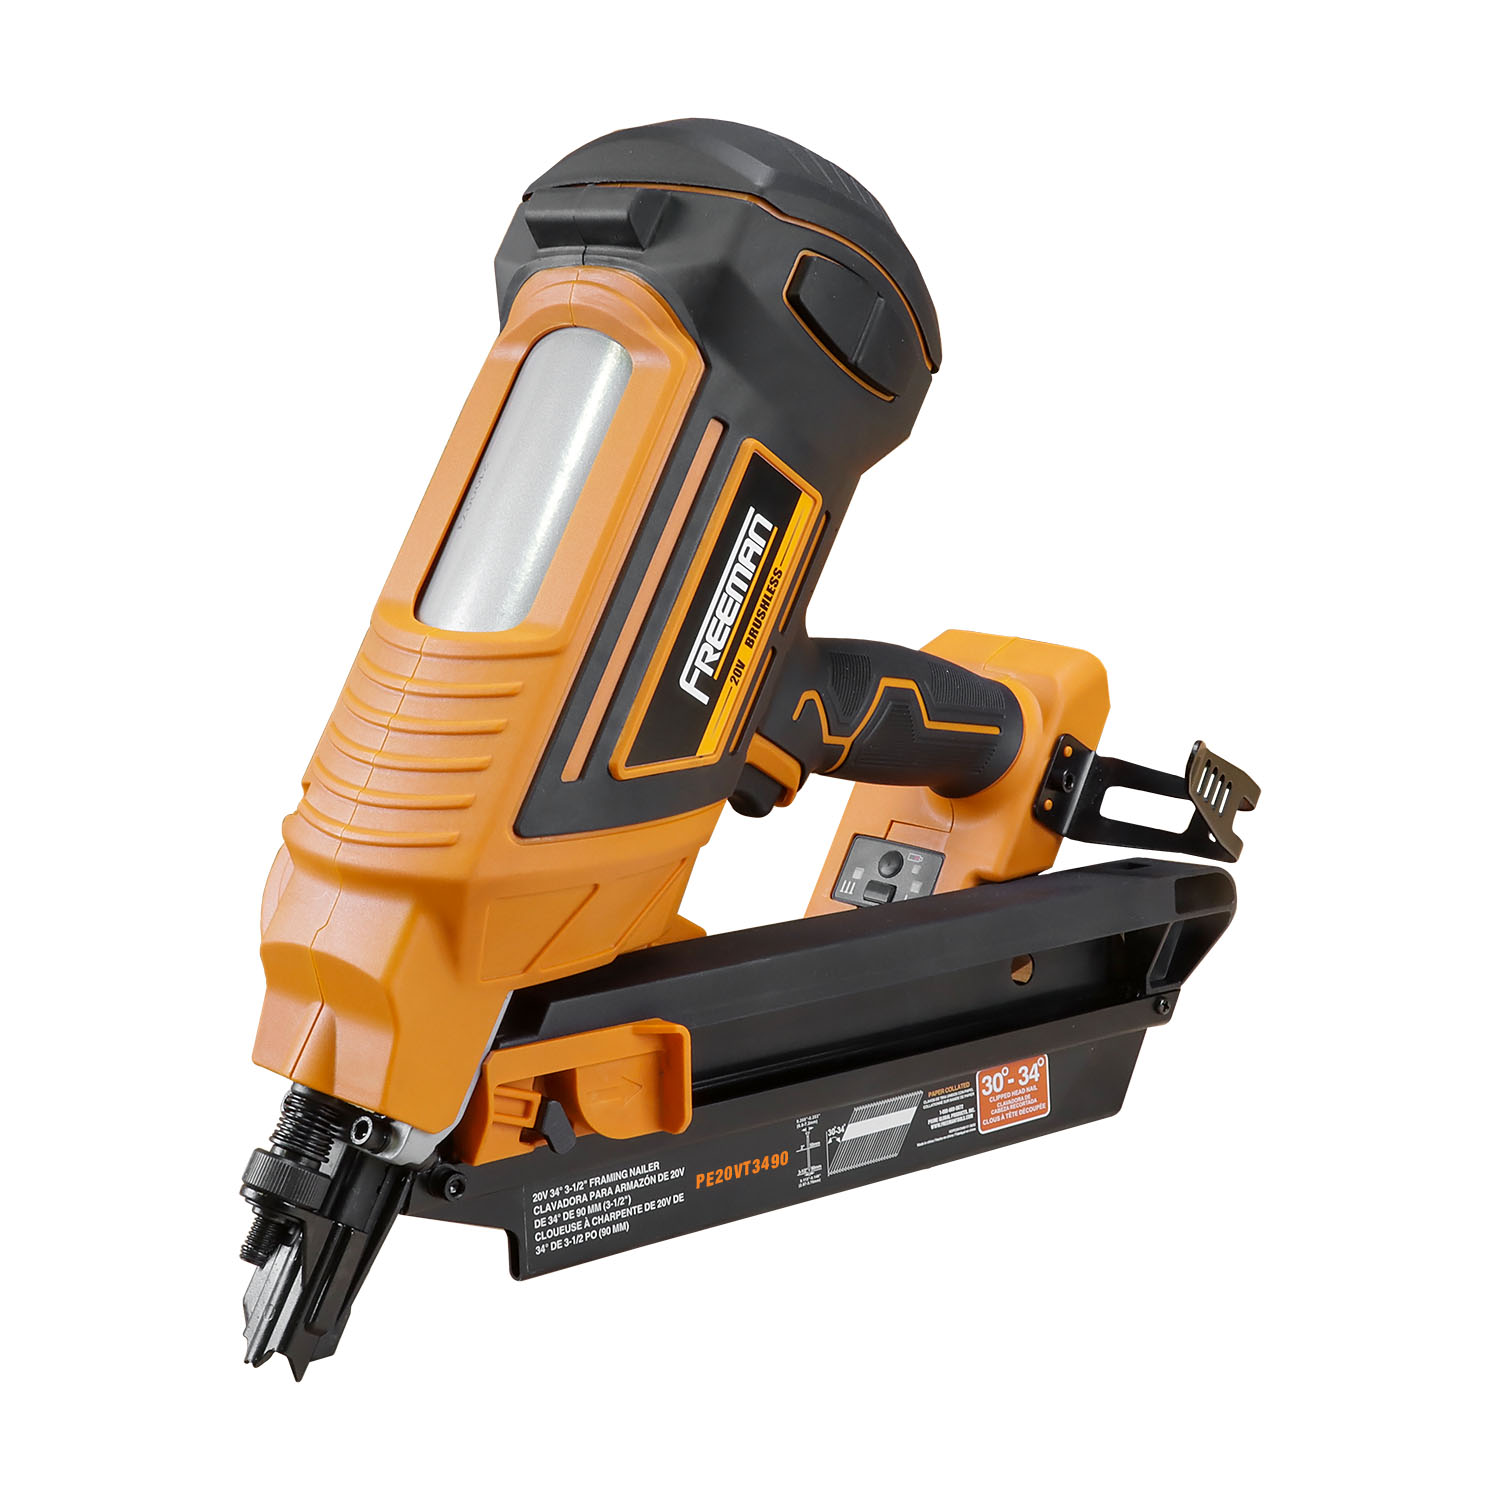 Titan 2nd Fix Nail Gun Review: Affordable and Effective? - YouTube